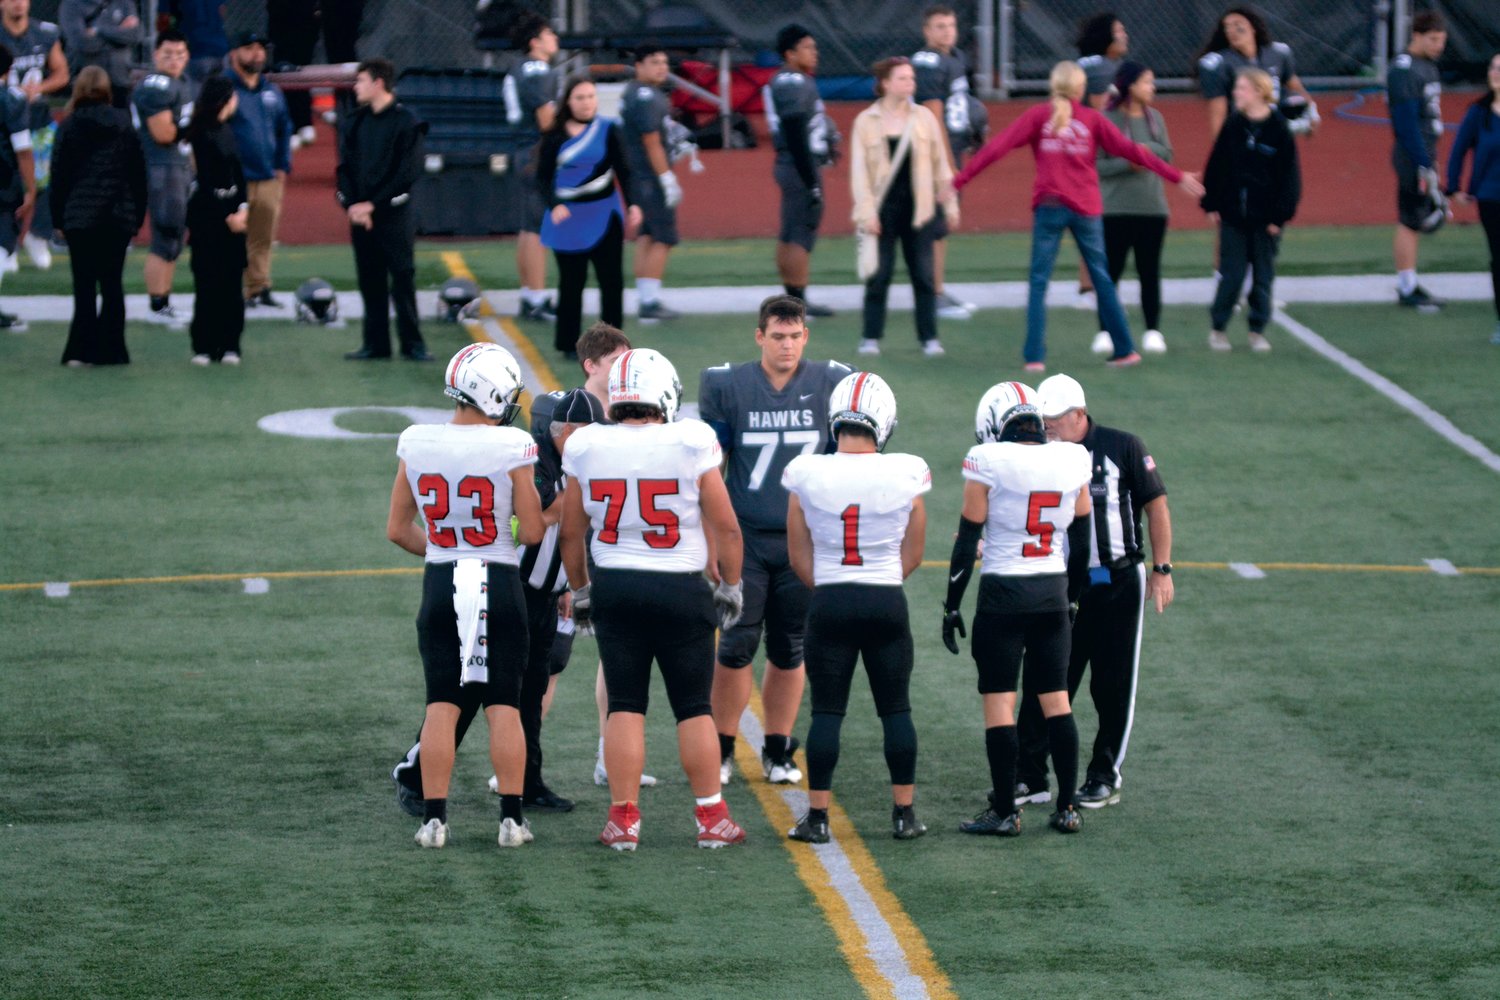 Yelm’s captains take to the middle of the field for the pre-game coin toss.